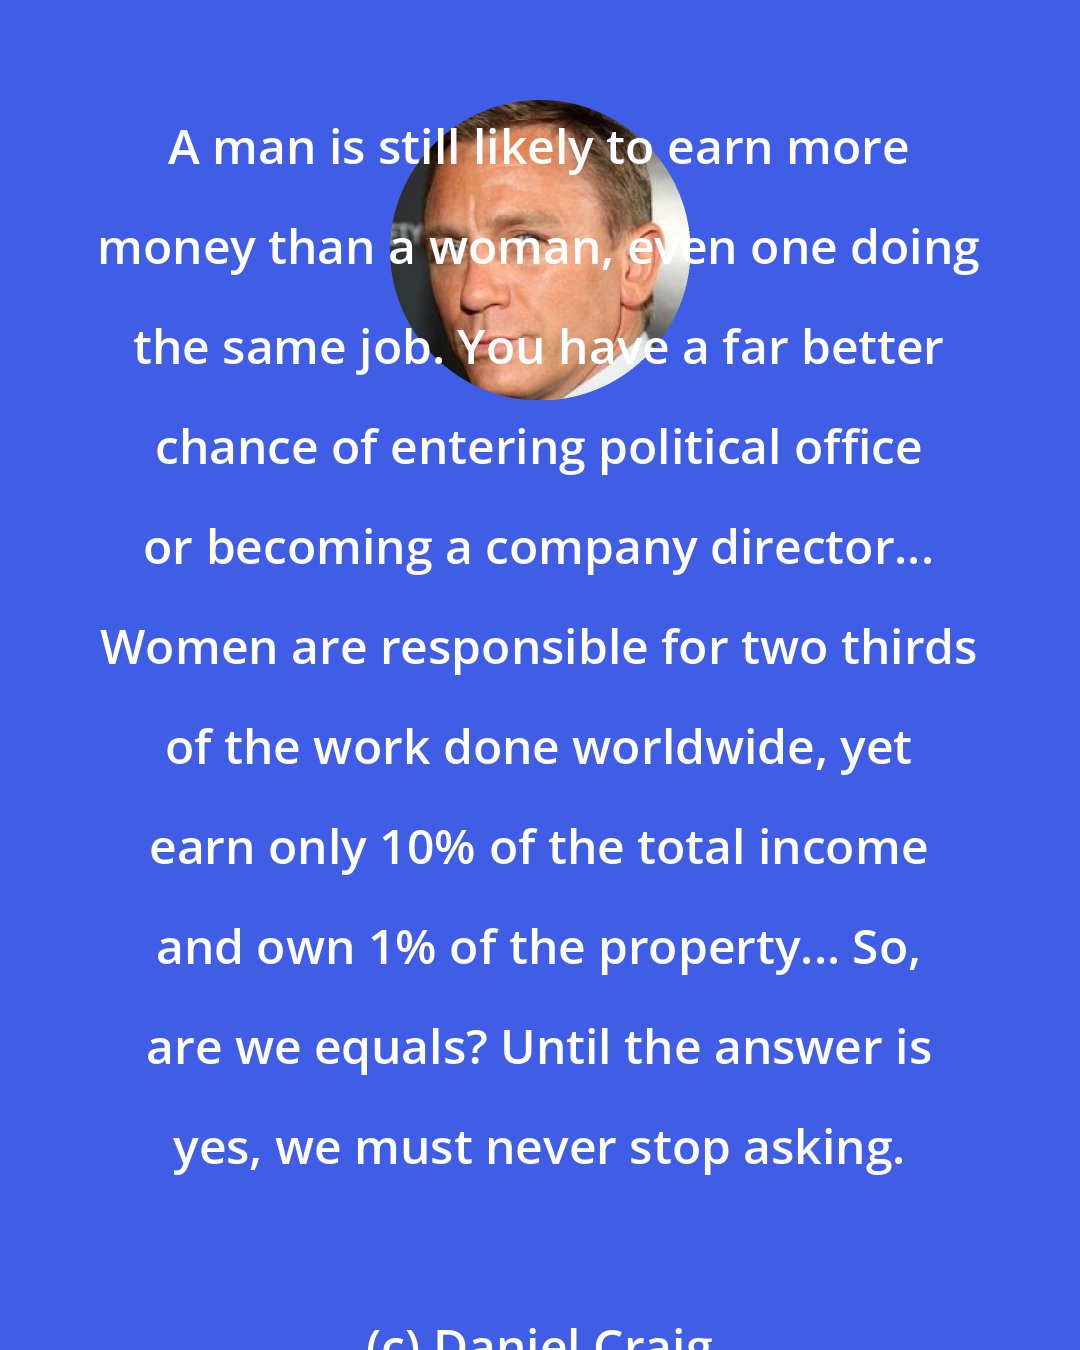 Daniel Craig: A man is still likely to earn more money than a woman, even one doing the same job. You have a far better chance of entering political office or becoming a company director... Women are responsible for two thirds of the work done worldwide, yet earn only 10% of the total income and own 1% of the property... So, are we equals? Until the answer is yes, we must never stop asking.